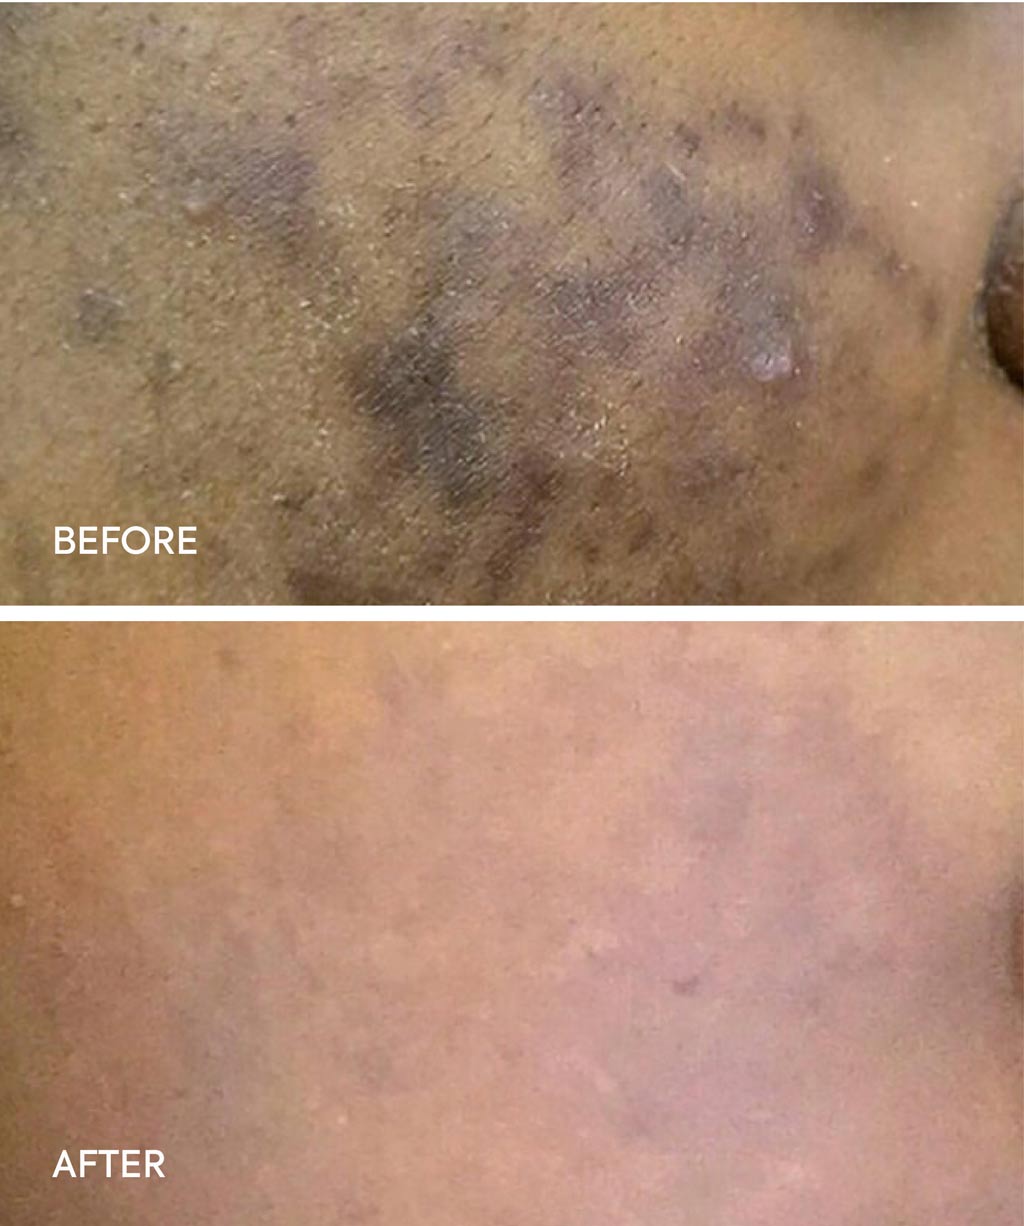 Cosmelan Treatment before and after images - 2